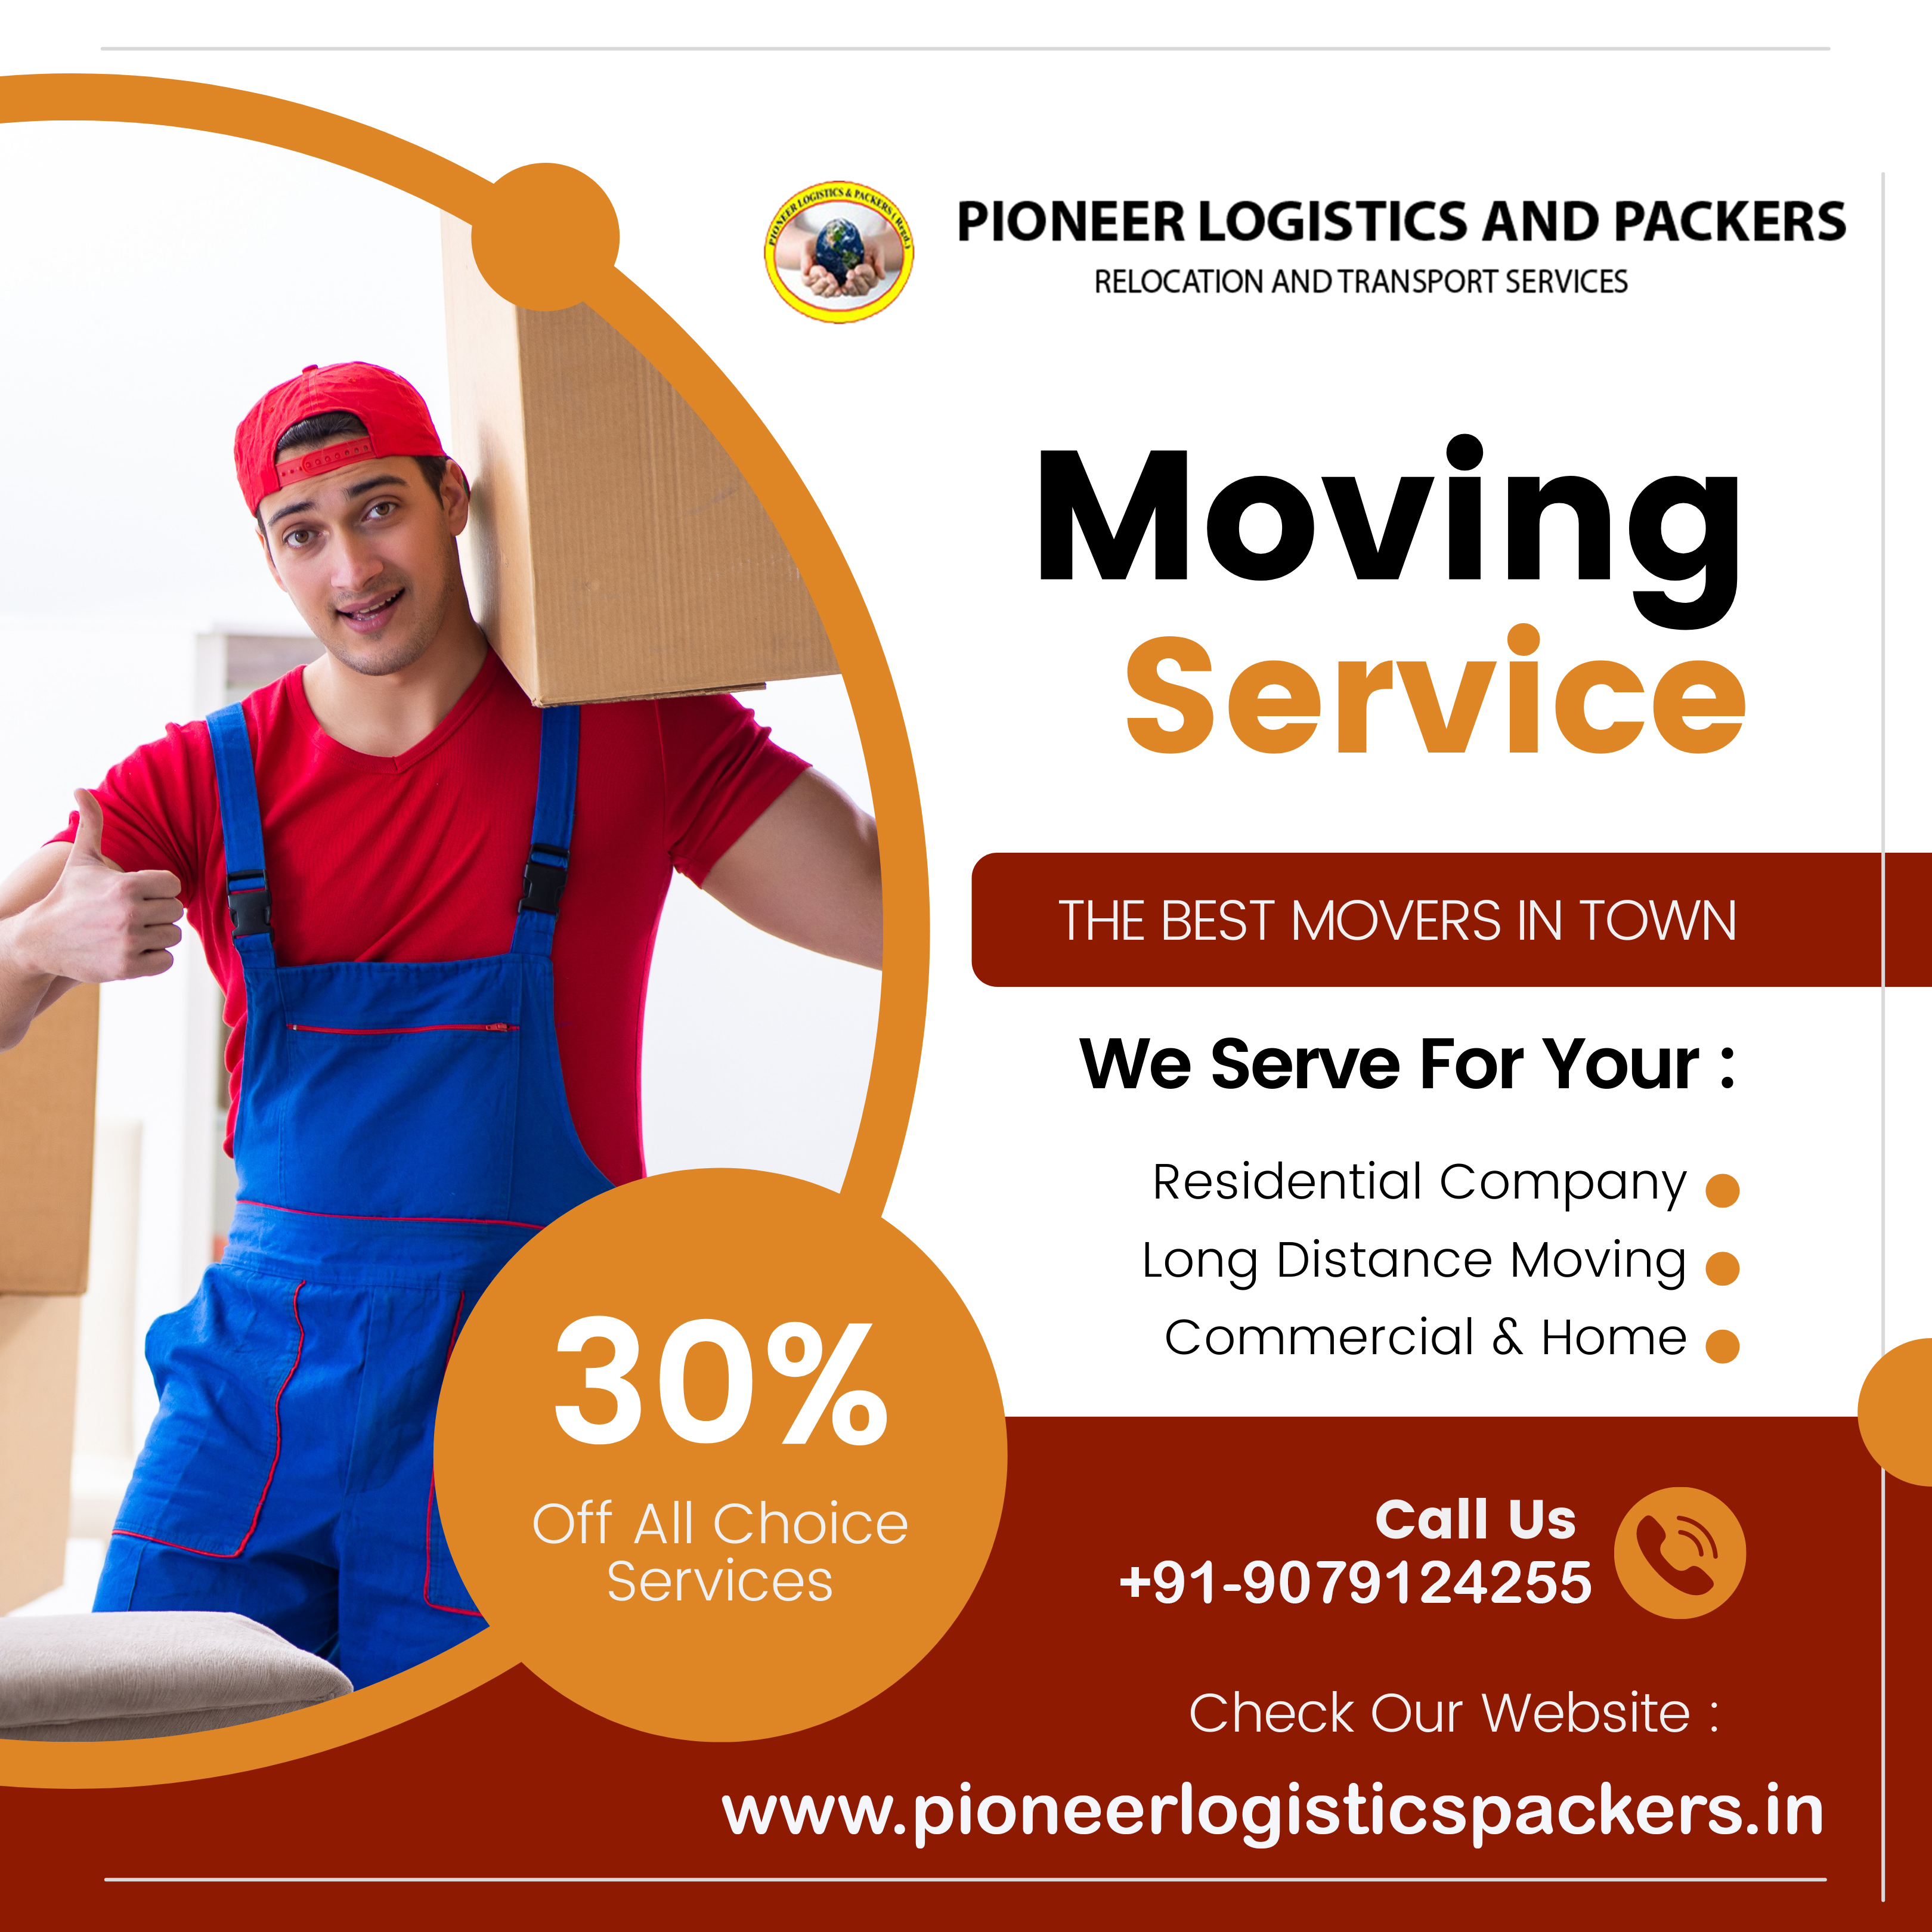 packers and movers in surat